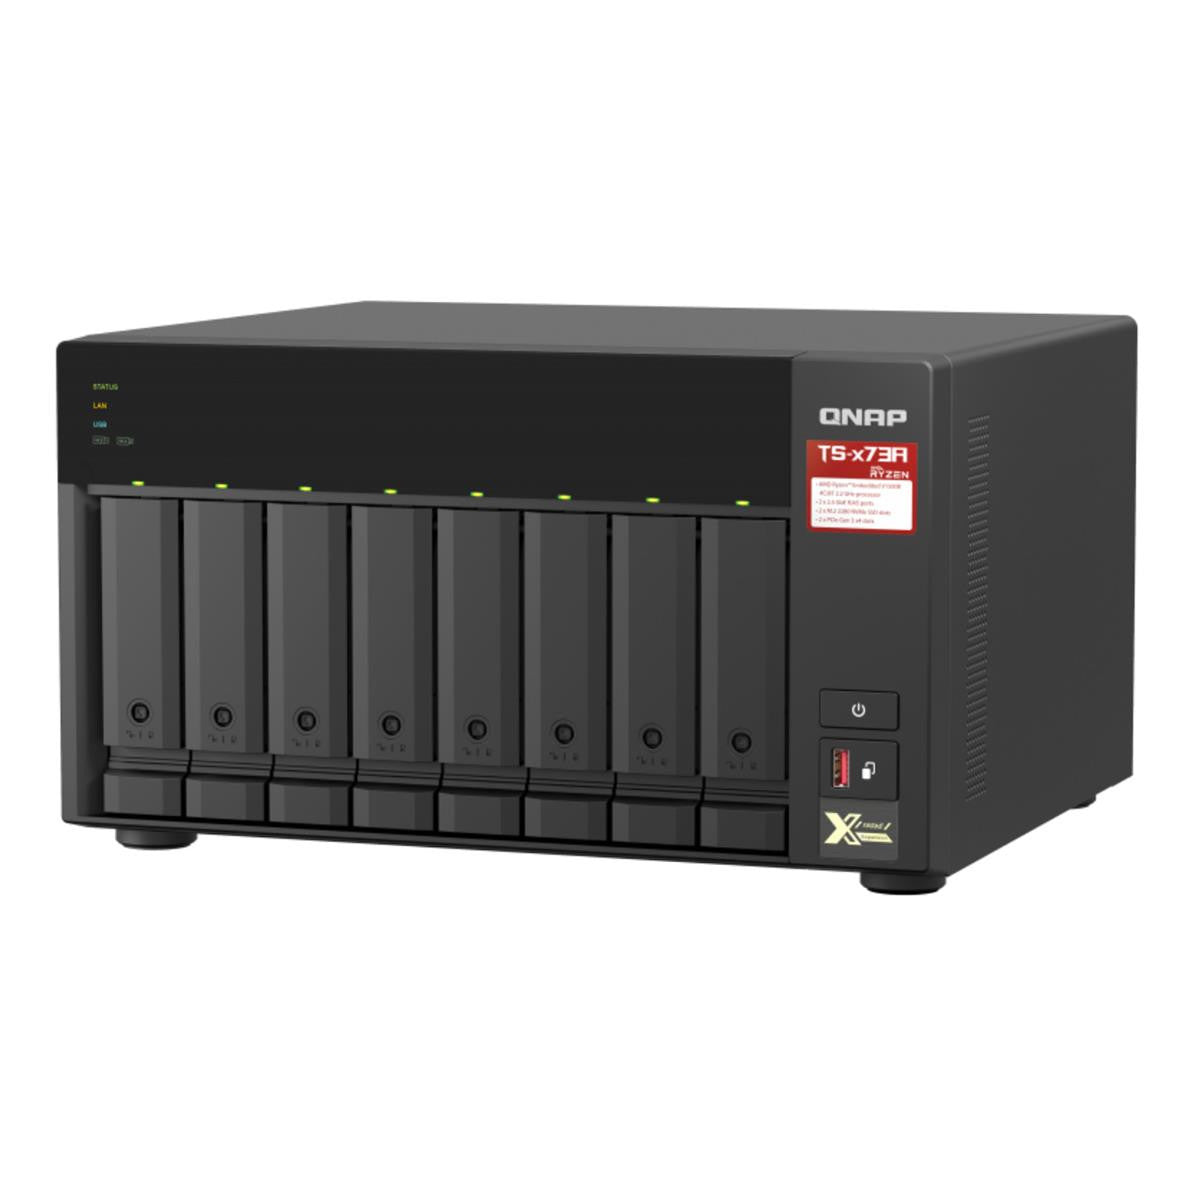 QNAP TS-873A 8-BAY NAS with 32GB DDR4 RAM and 32TB (8x4TB) Seagate Ironwolf NAS Drives Fully Assembled and Tested